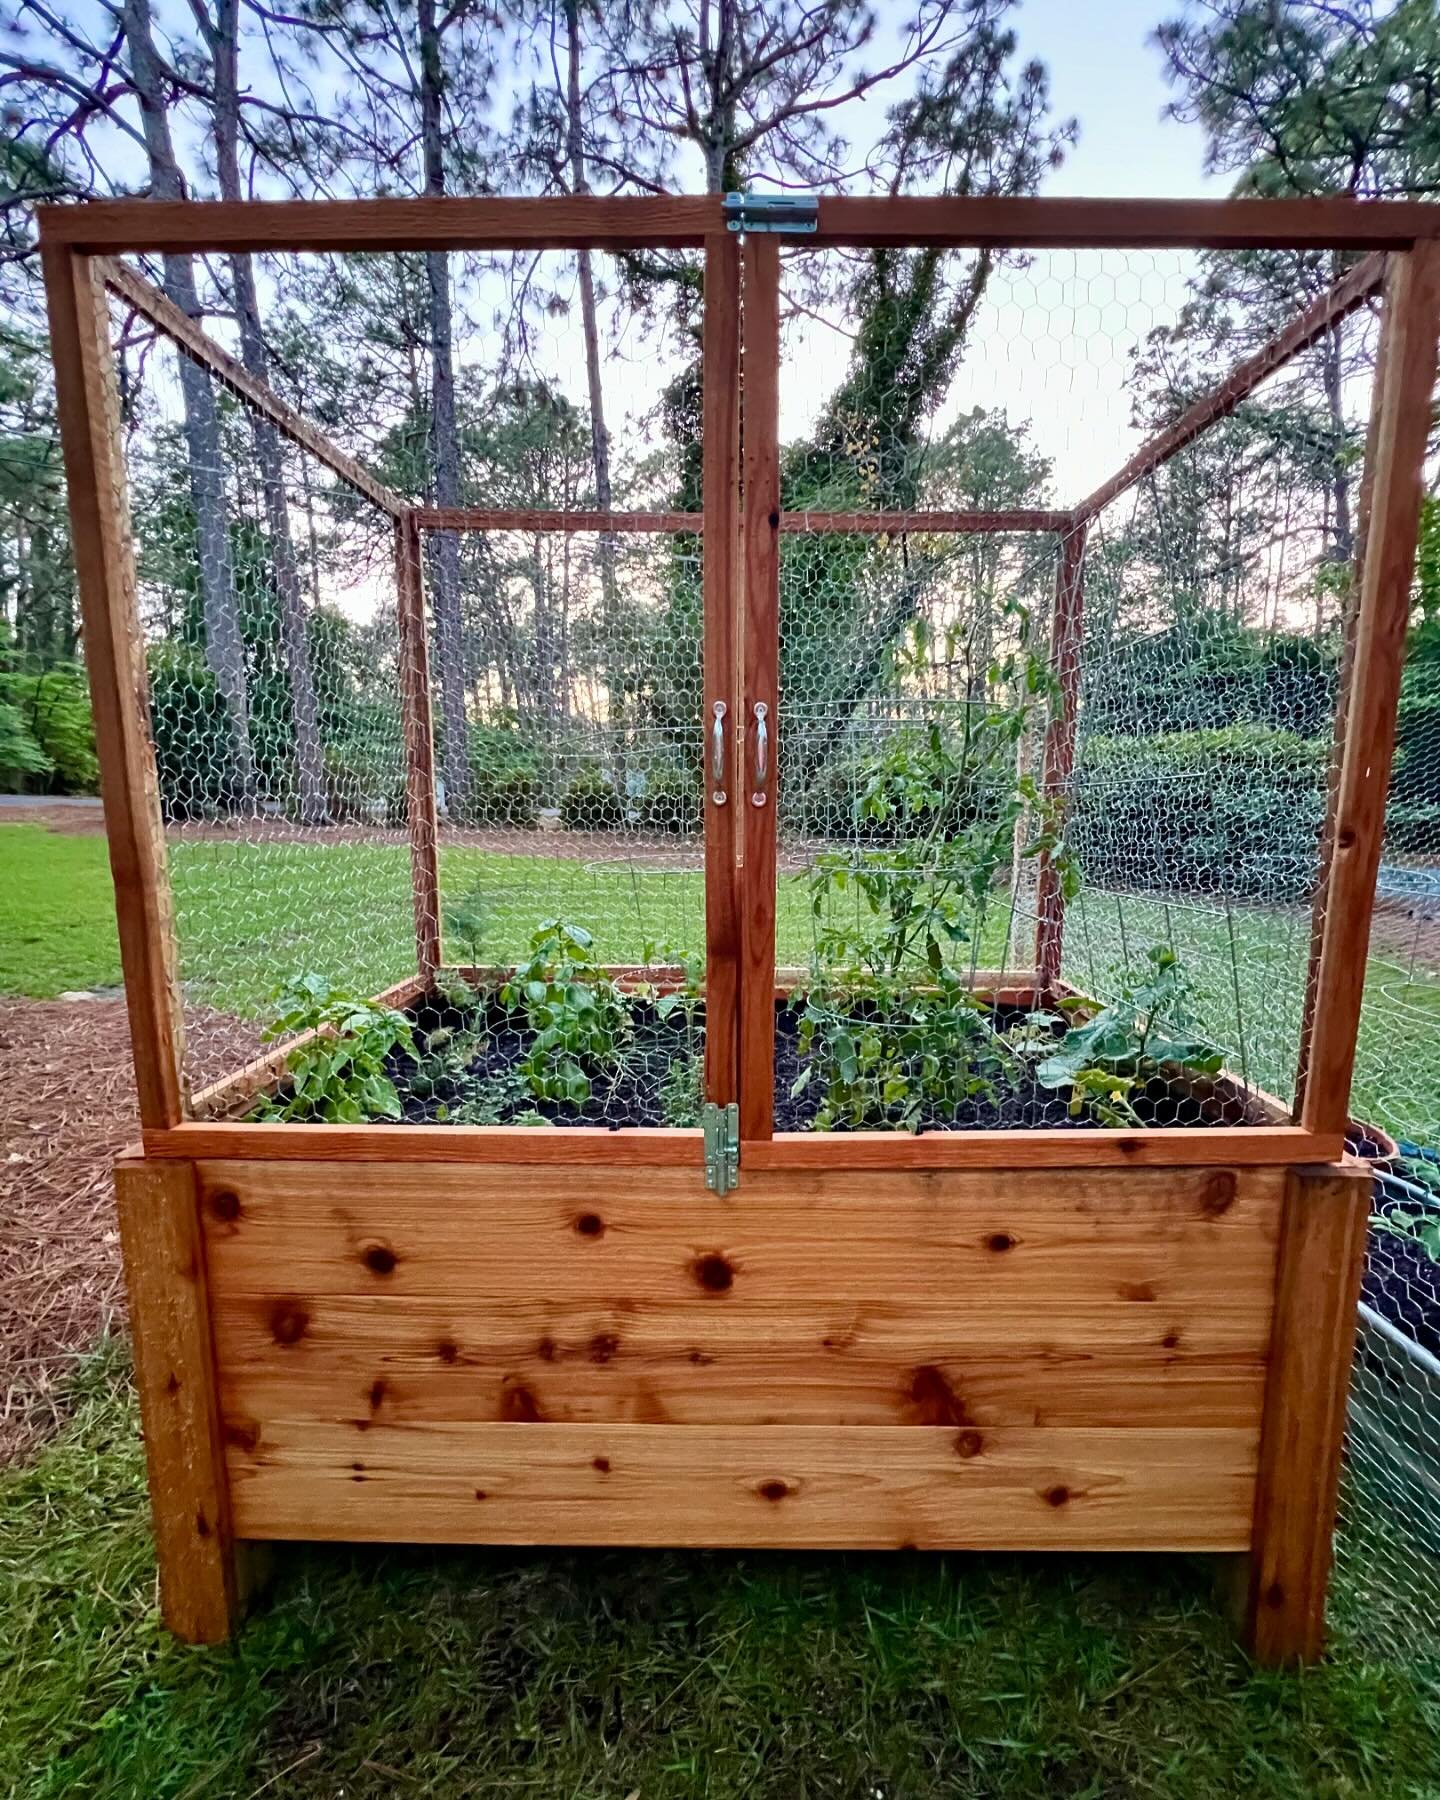 🌱 HUGE shoutout my handy and creative hubby for making this beautiful (now deer proof, woohoo!) raised bed I&rsquo;m utterly obsessed with for our first go at growing some of our own veggies and herbs! 🤩 🍆🥒🍅🫑